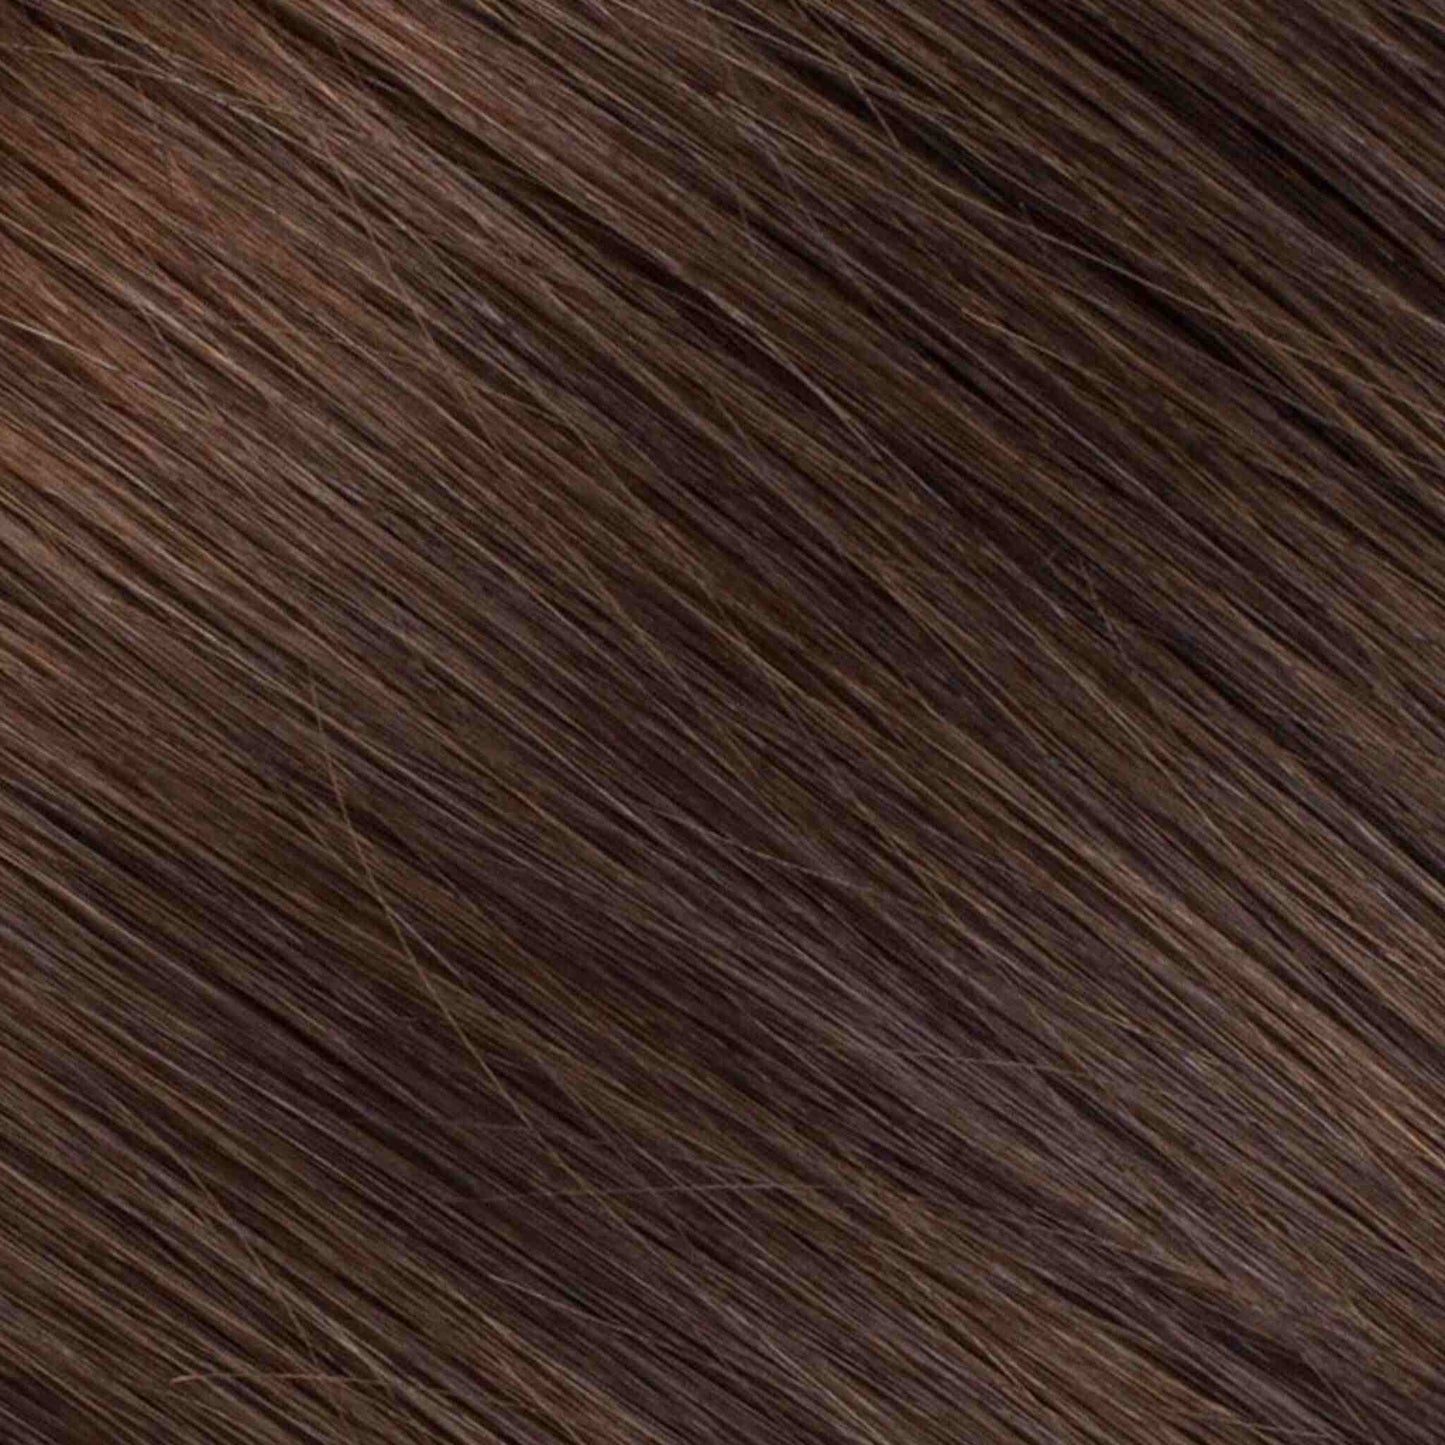 Tape-In 24" 55g Professional Hair Extensions - Chocolate Mahogany Ombre #1B/#2/#4